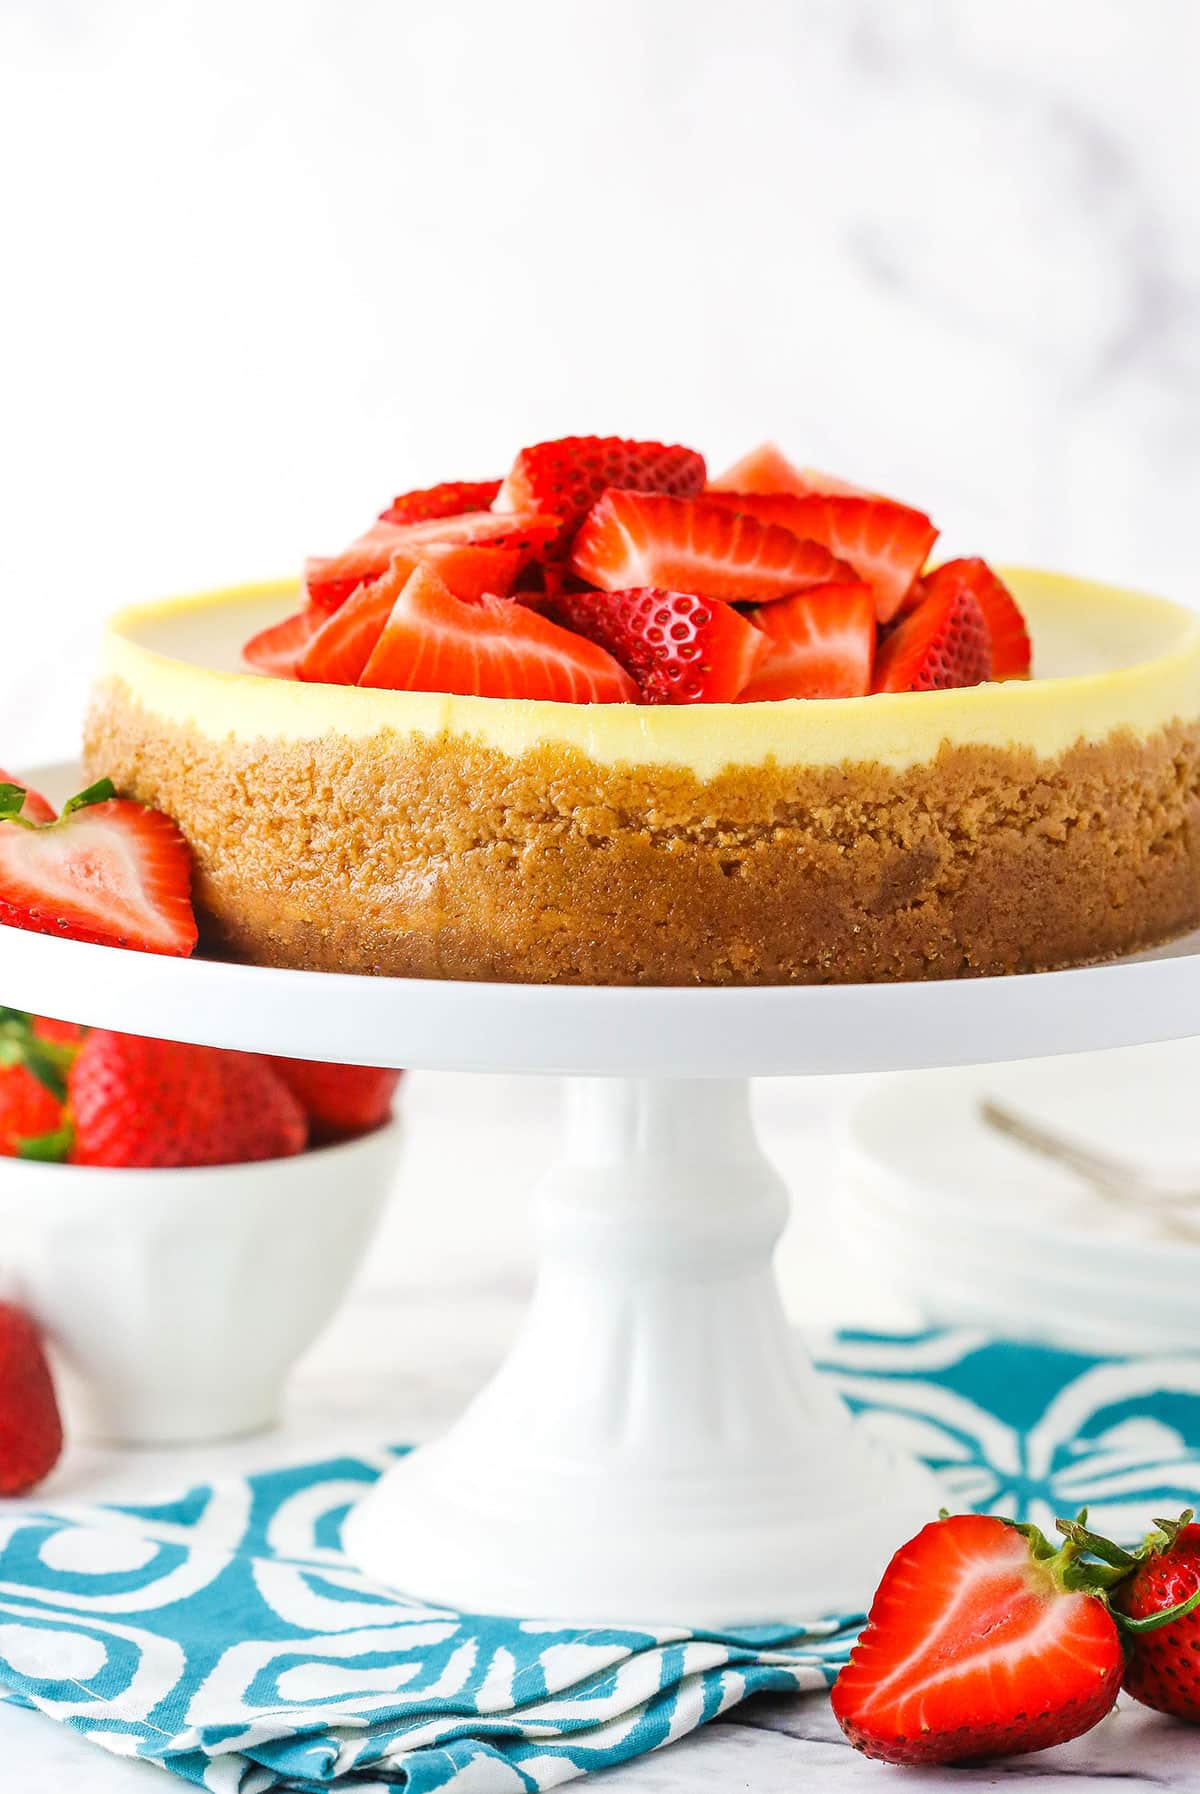 Best Instant Pot Cheesecake Recipe - How to Make Instant Pot Cheesecake